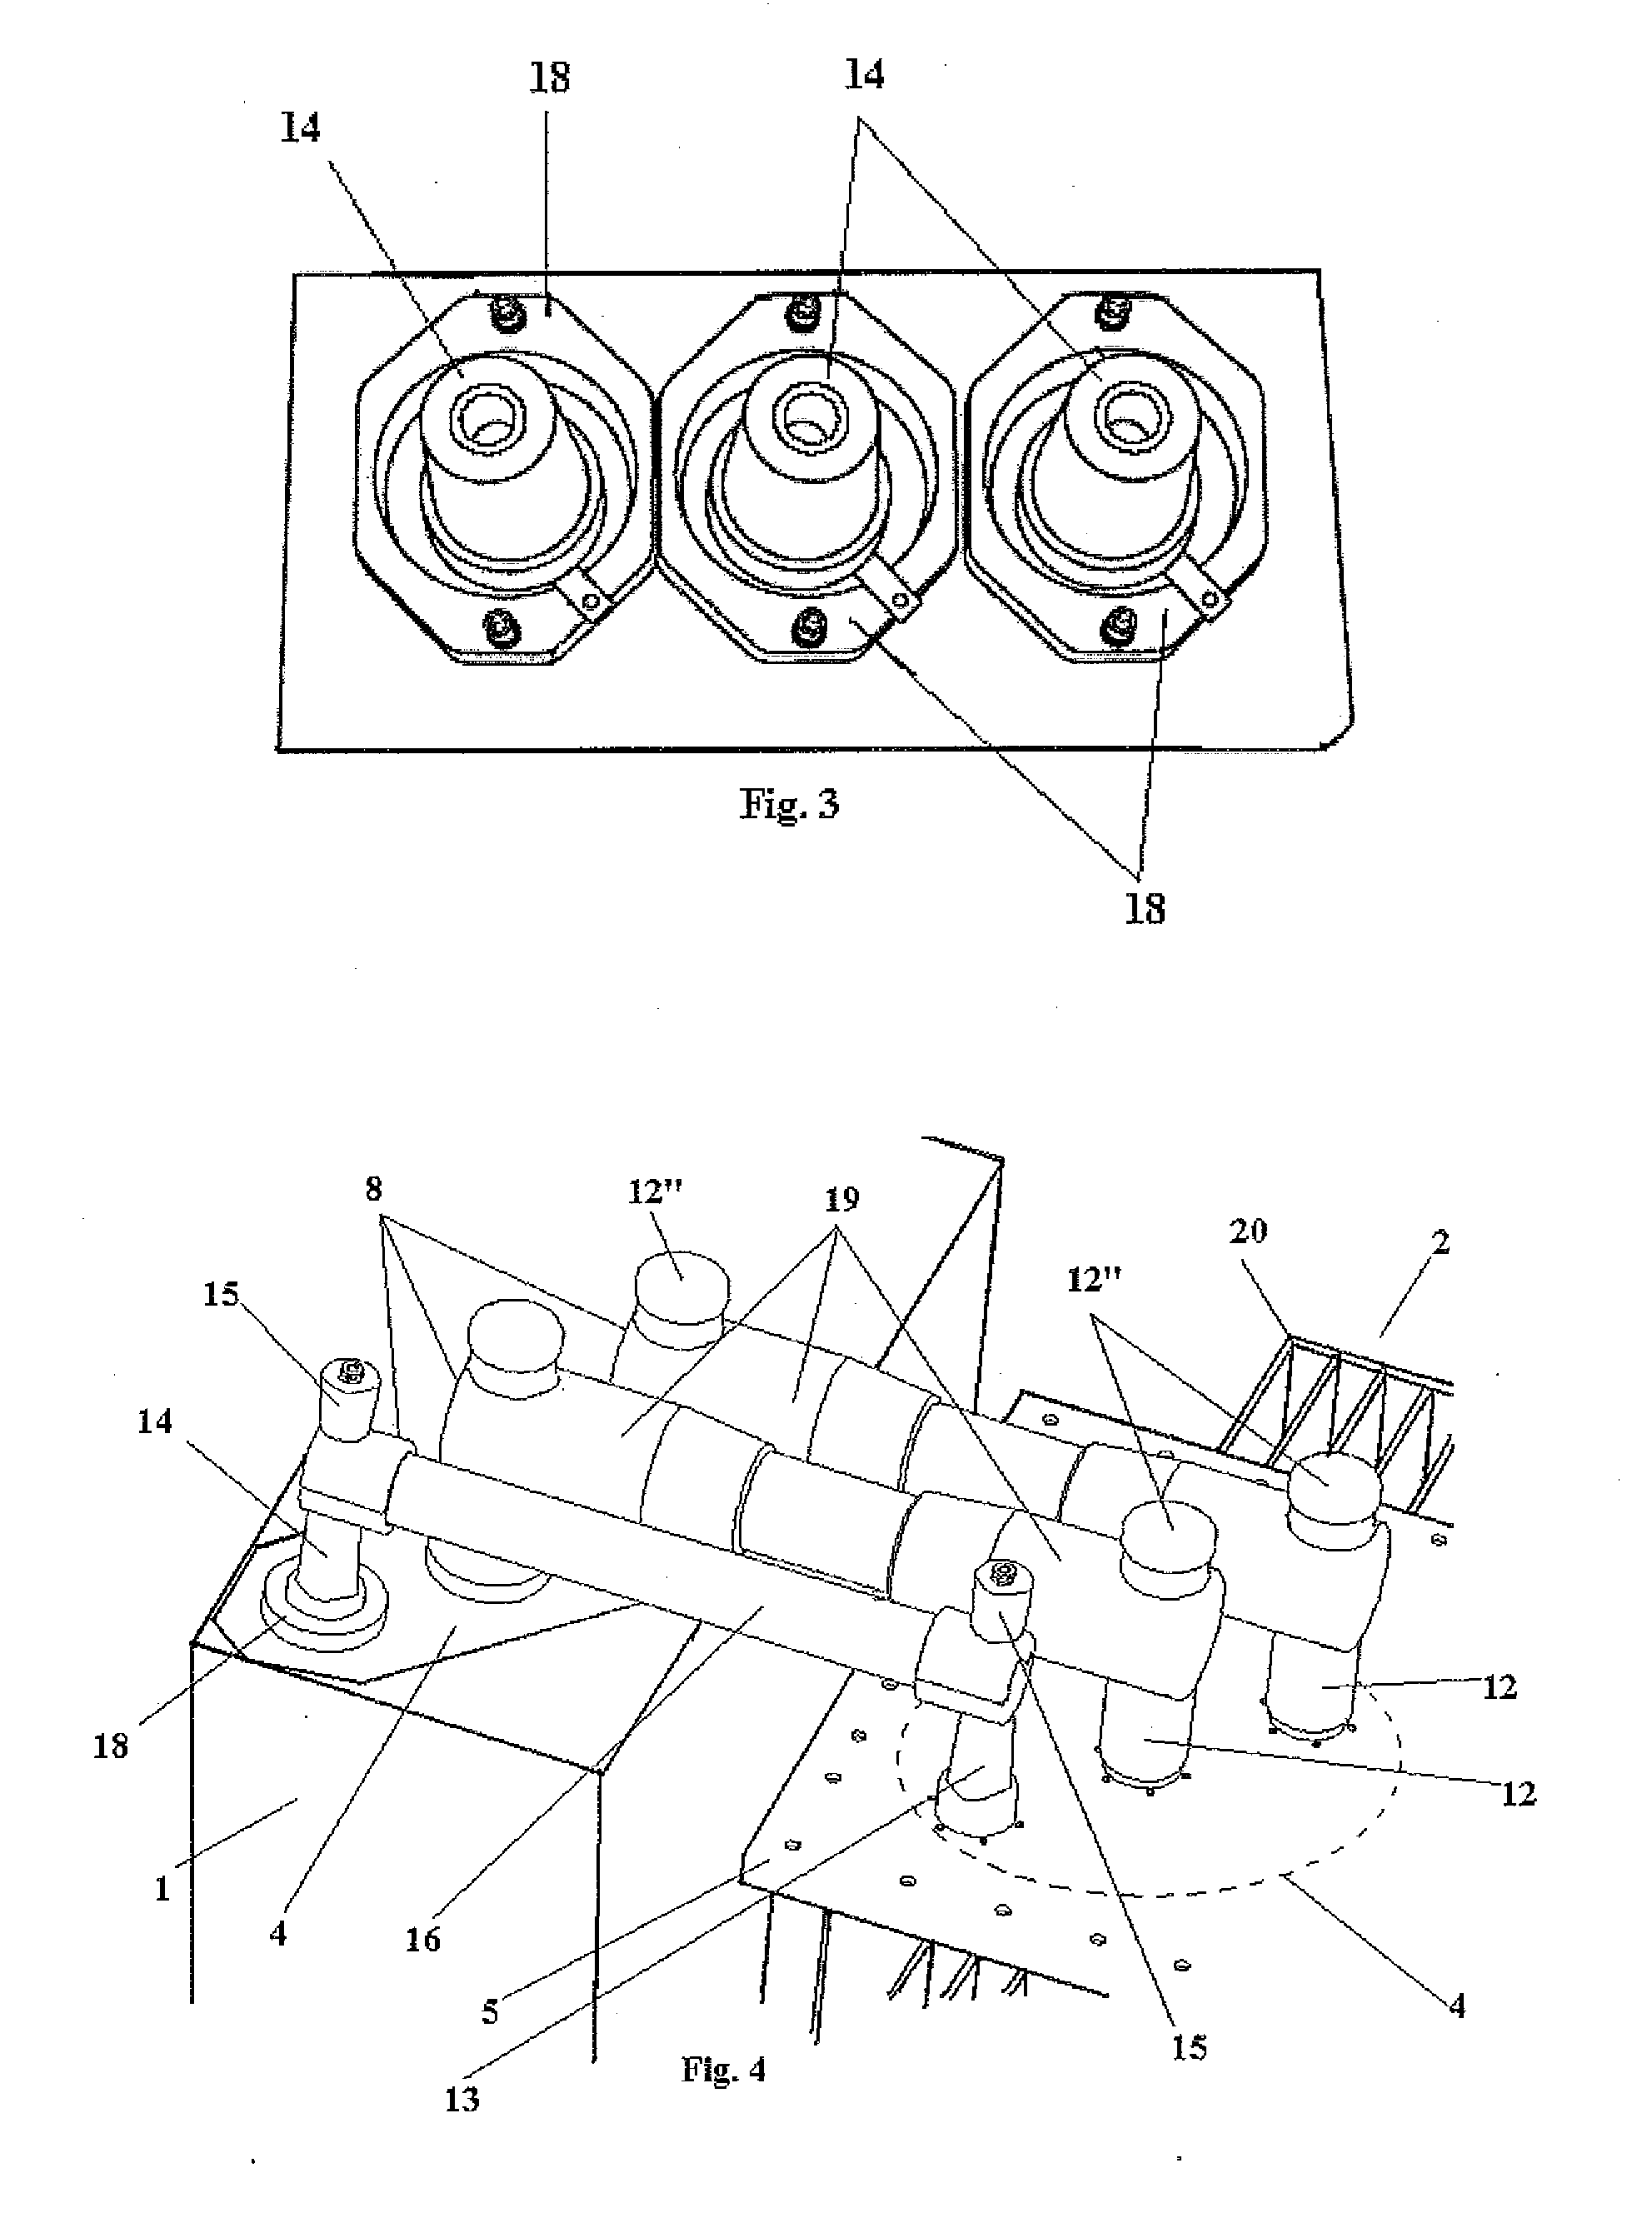 Connection device for transformer substation modules